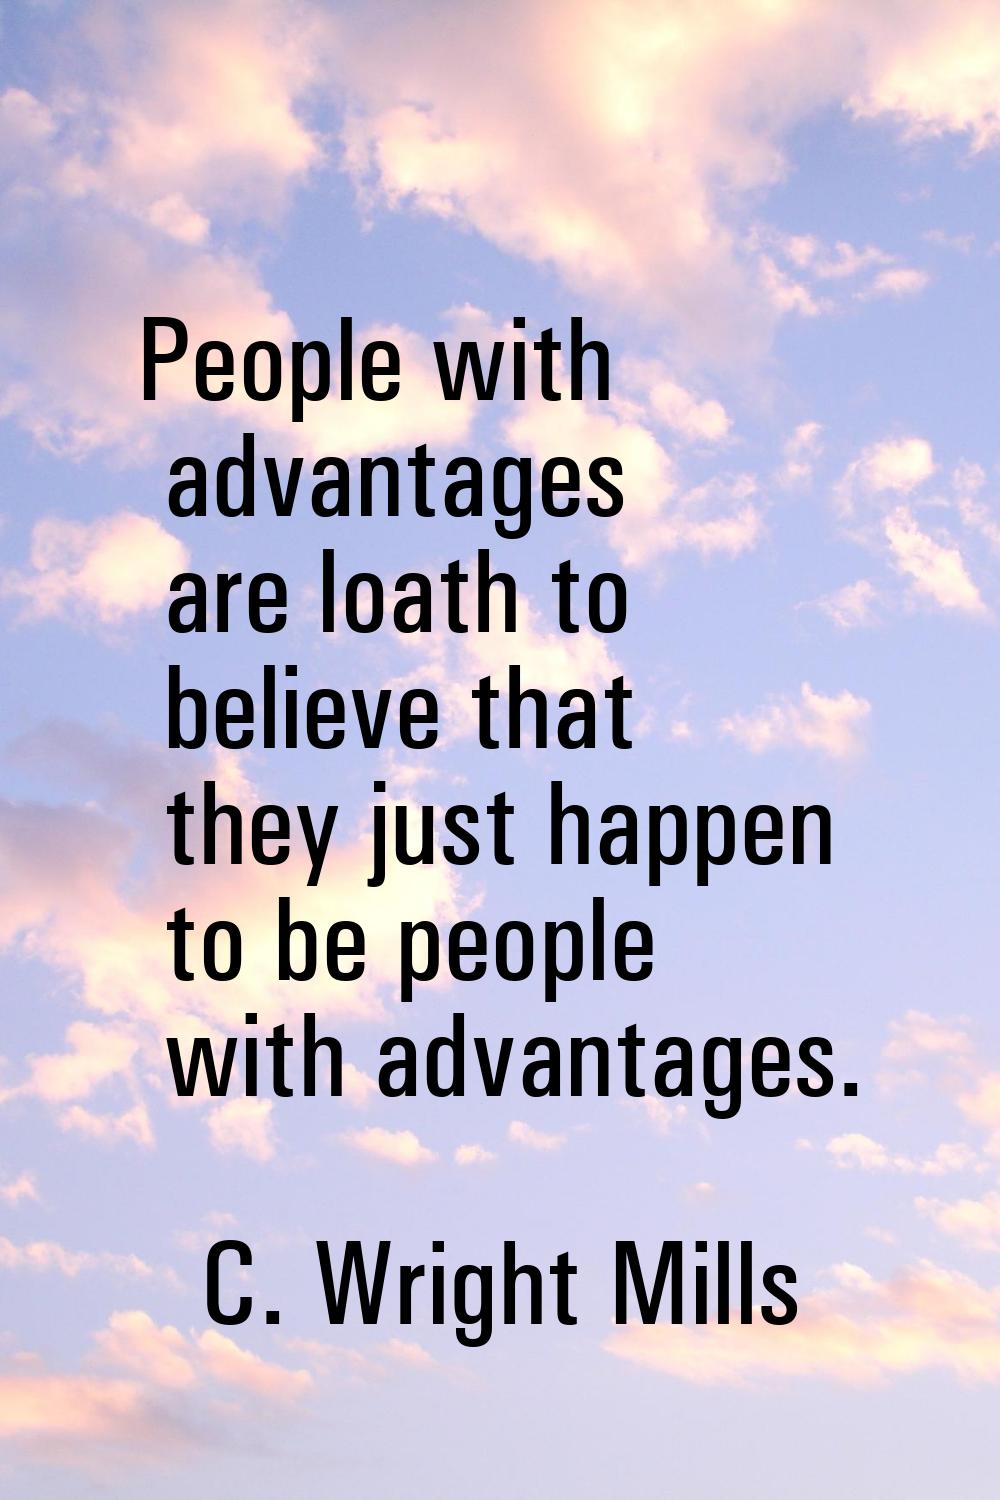 People with advantages are loath to believe that they just happen to be people with advantages.